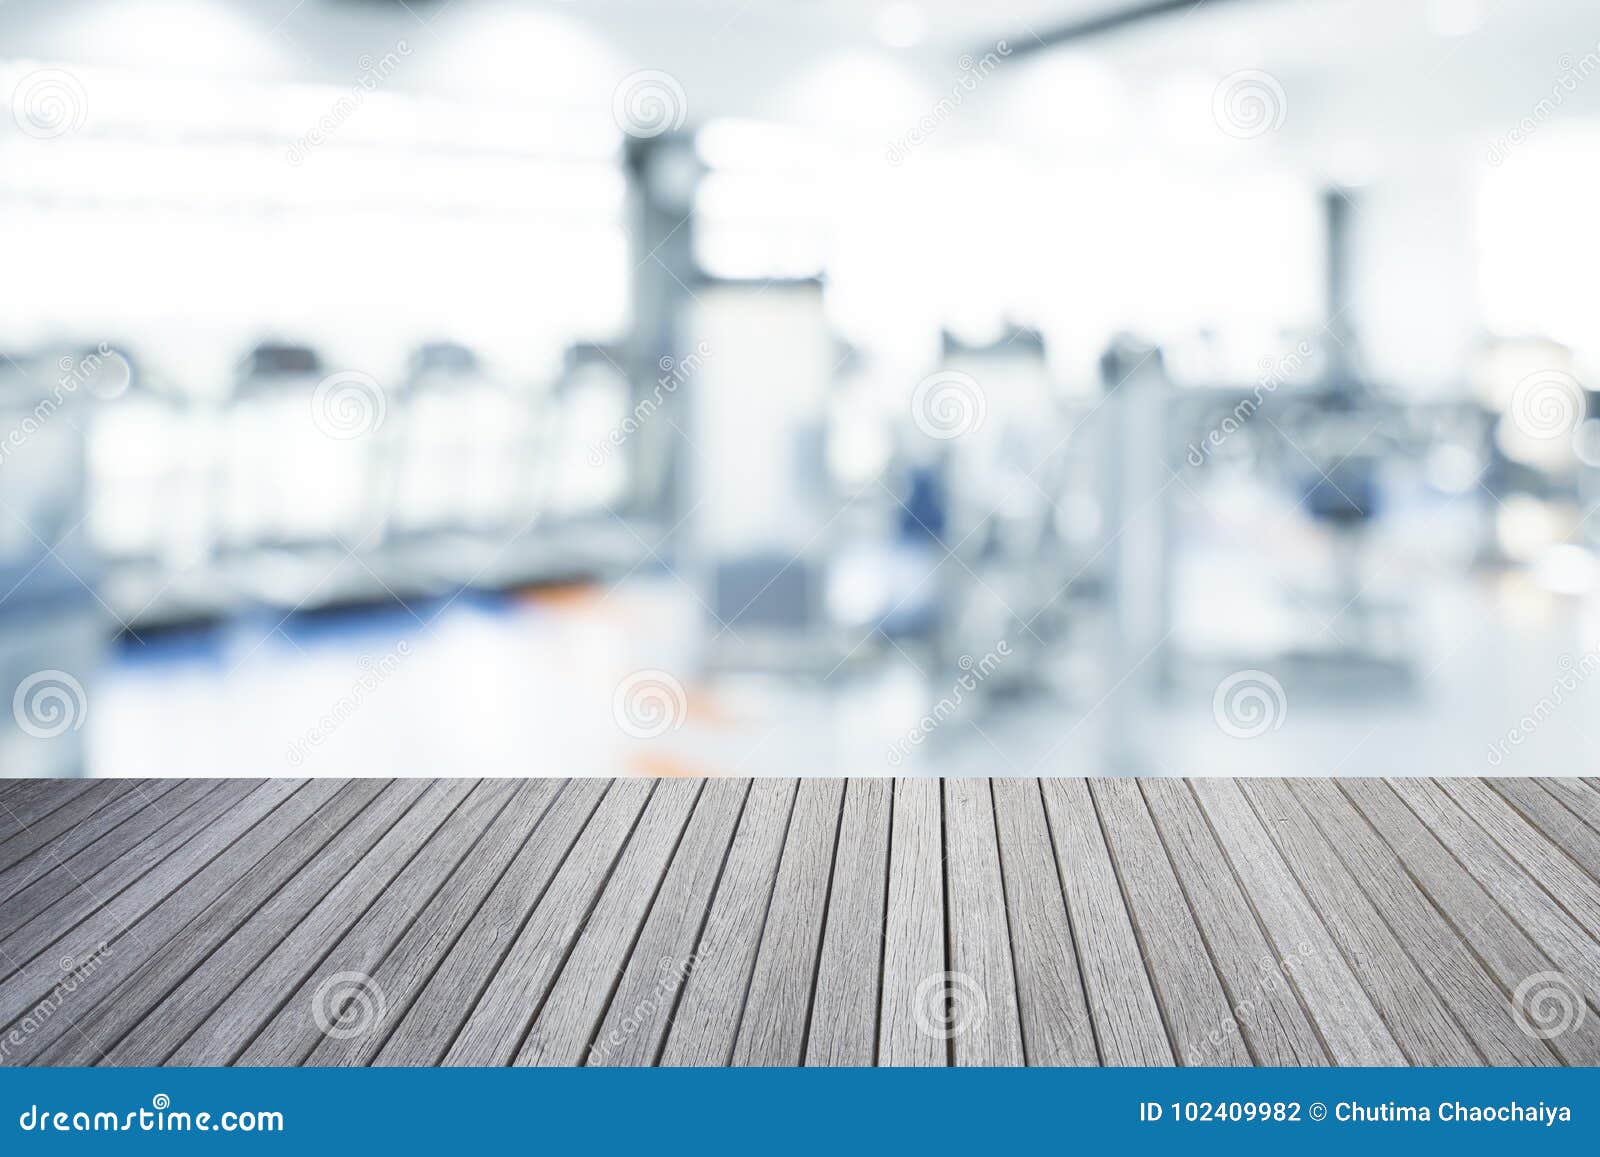 285 6 Gym Background Photos Free Royalty Free Stock Photos From Dreamstime